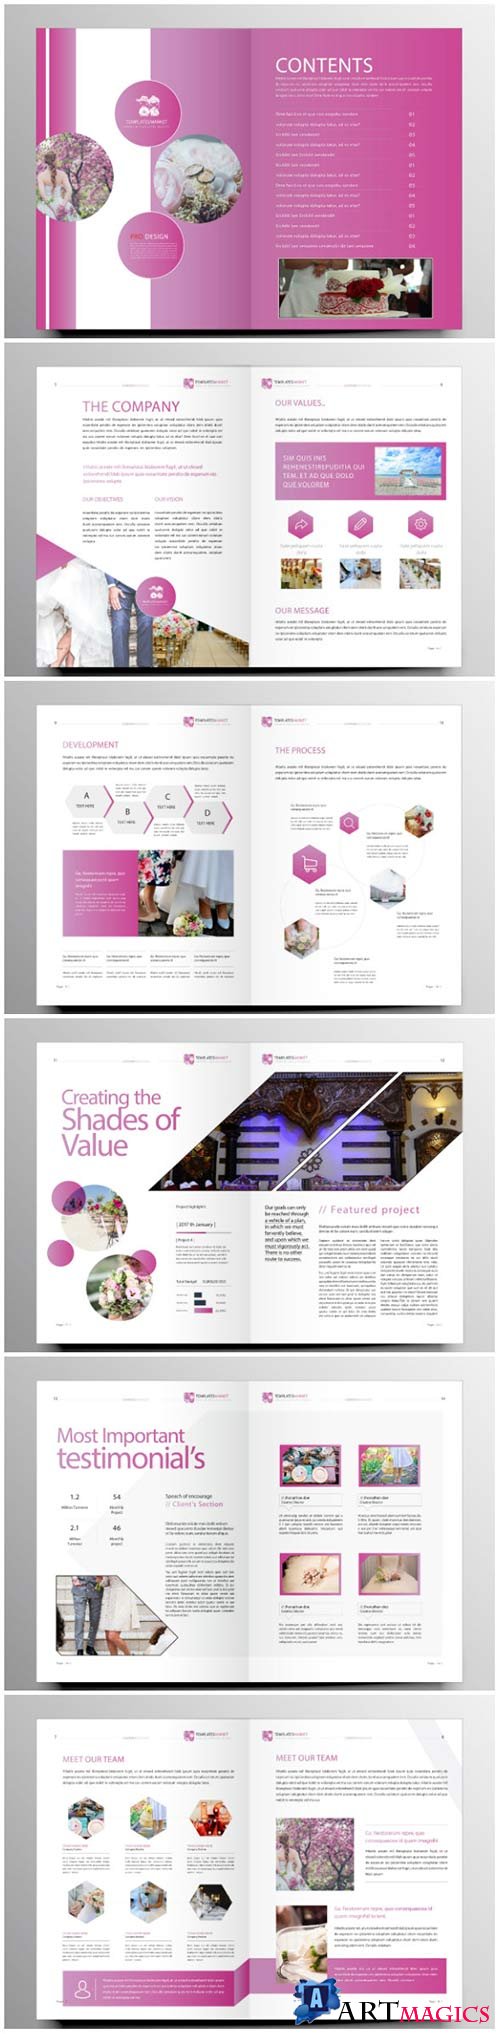 Brochure template vector layout design, corporate business annual report, magazine, flyer mockup # 202